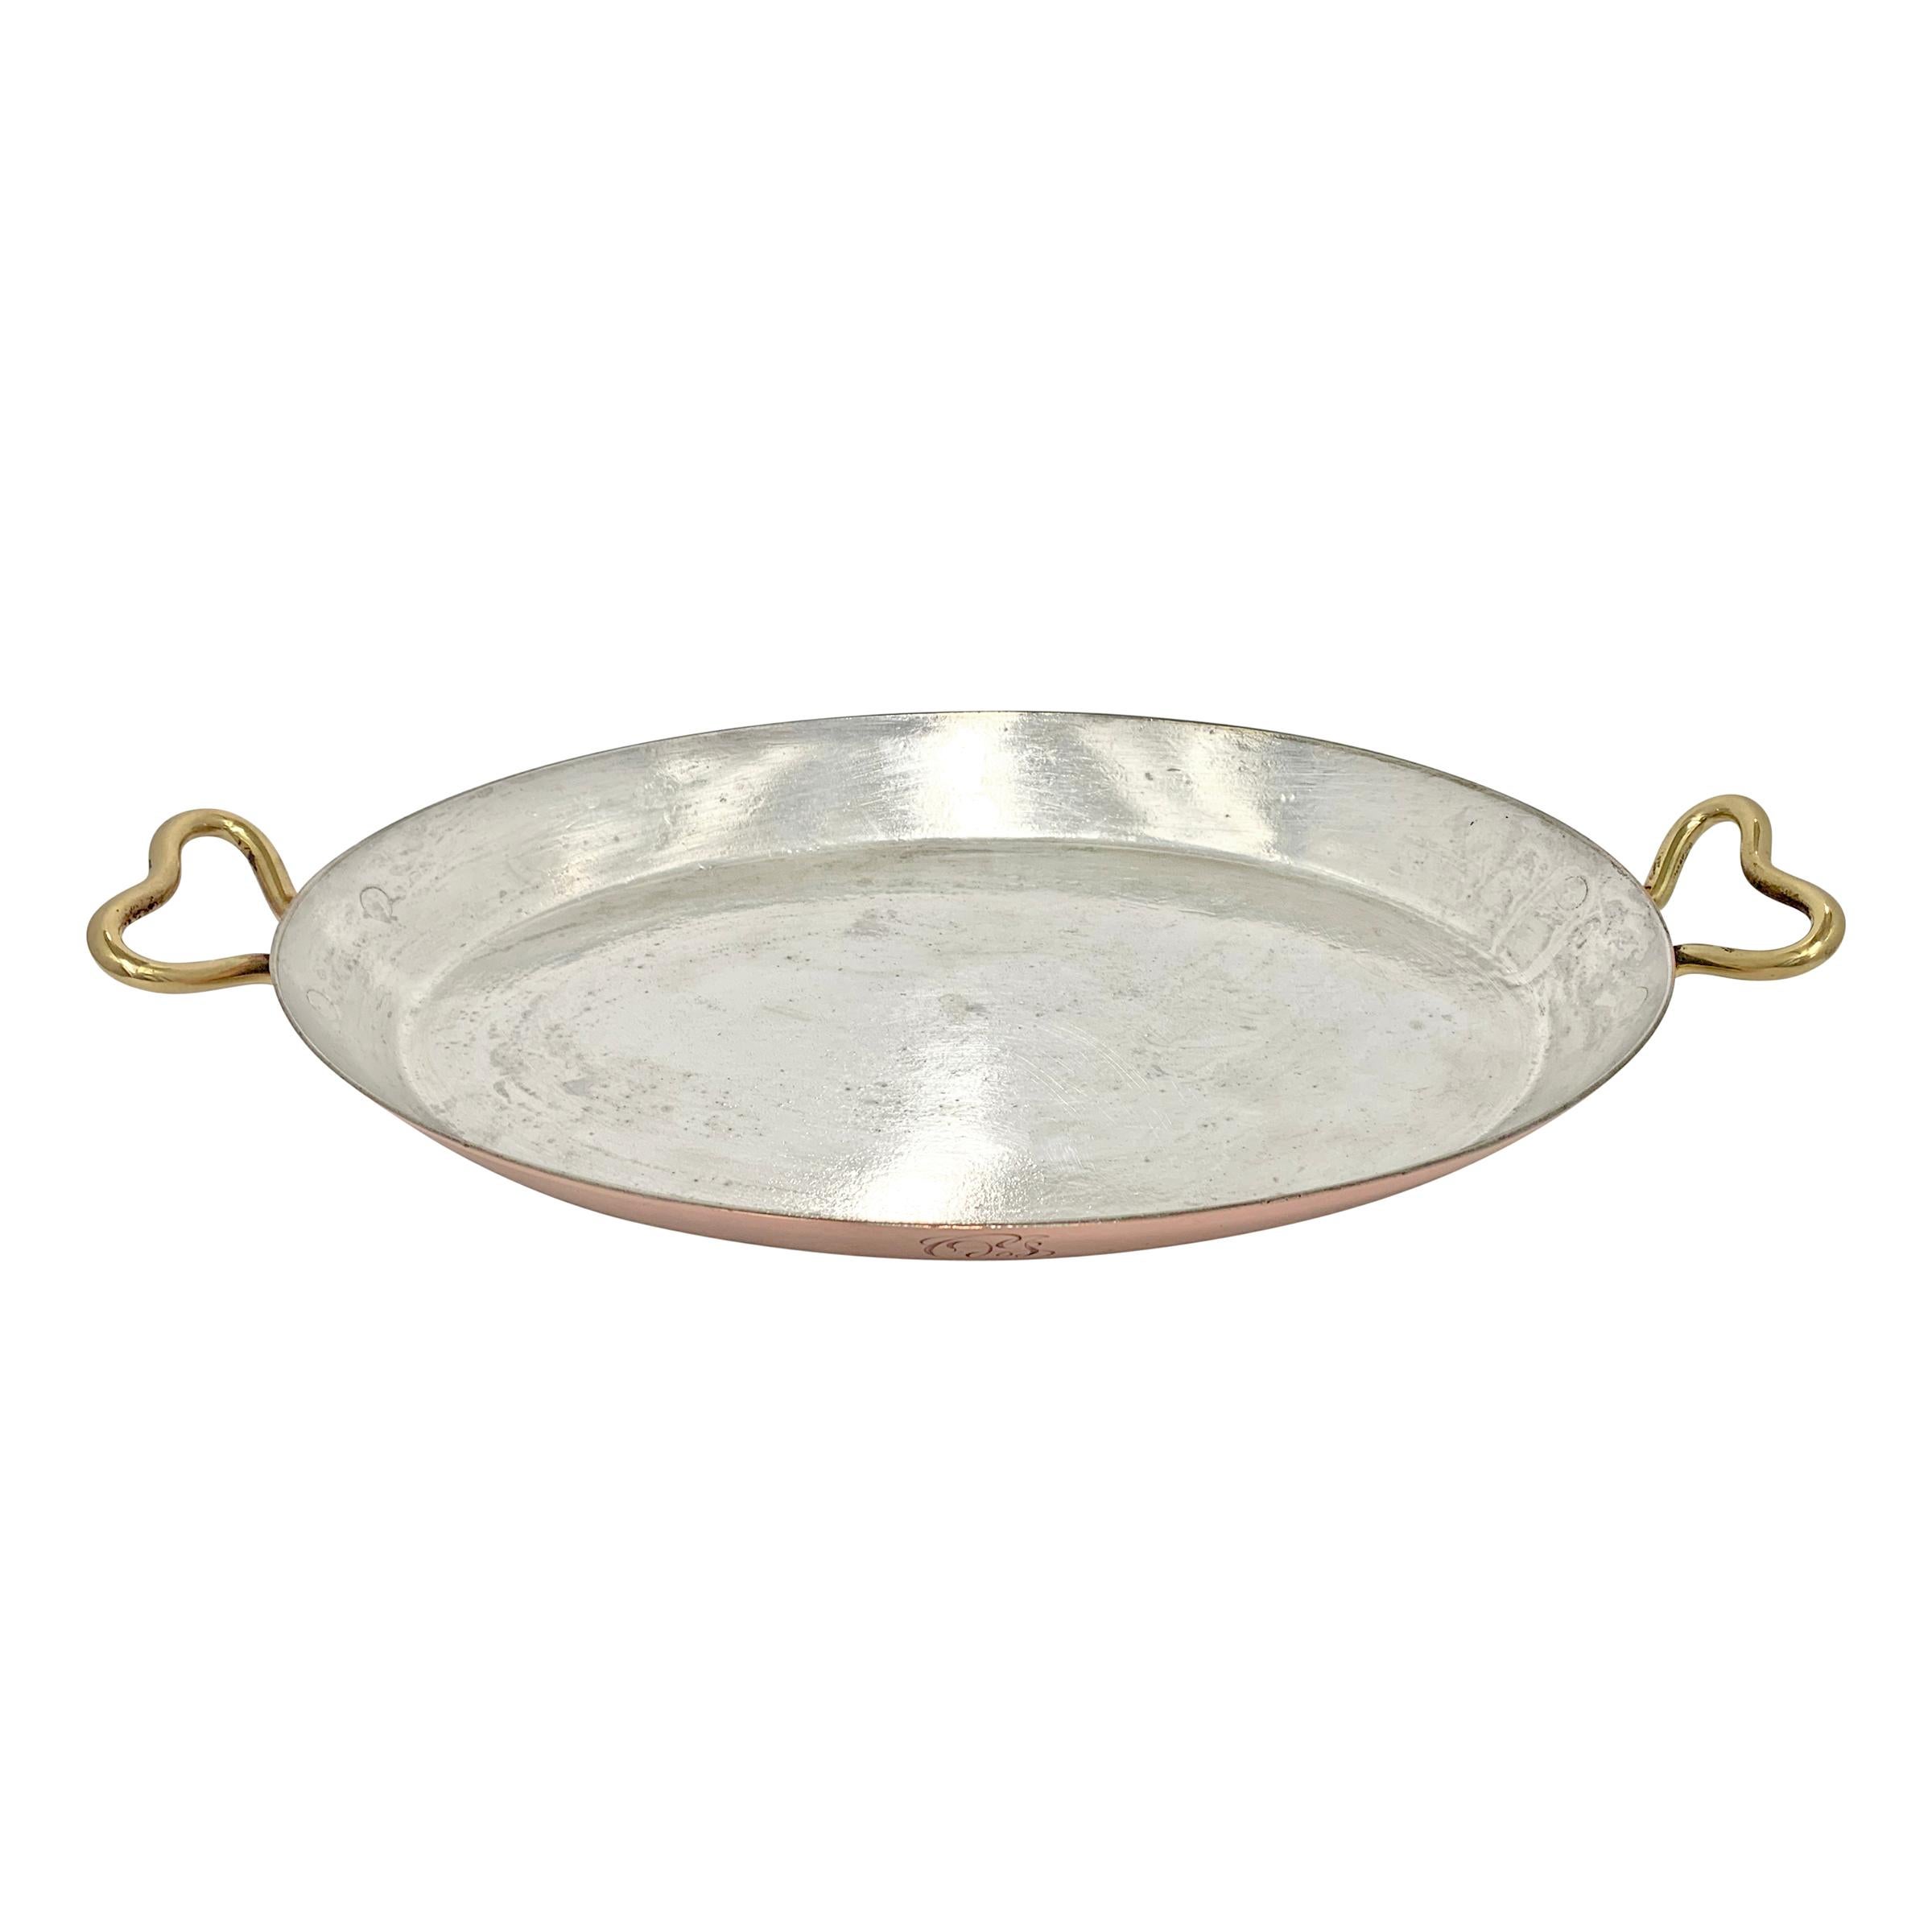 An early 20th century copper au gratin pan with bronze handles and an engraved monogram (